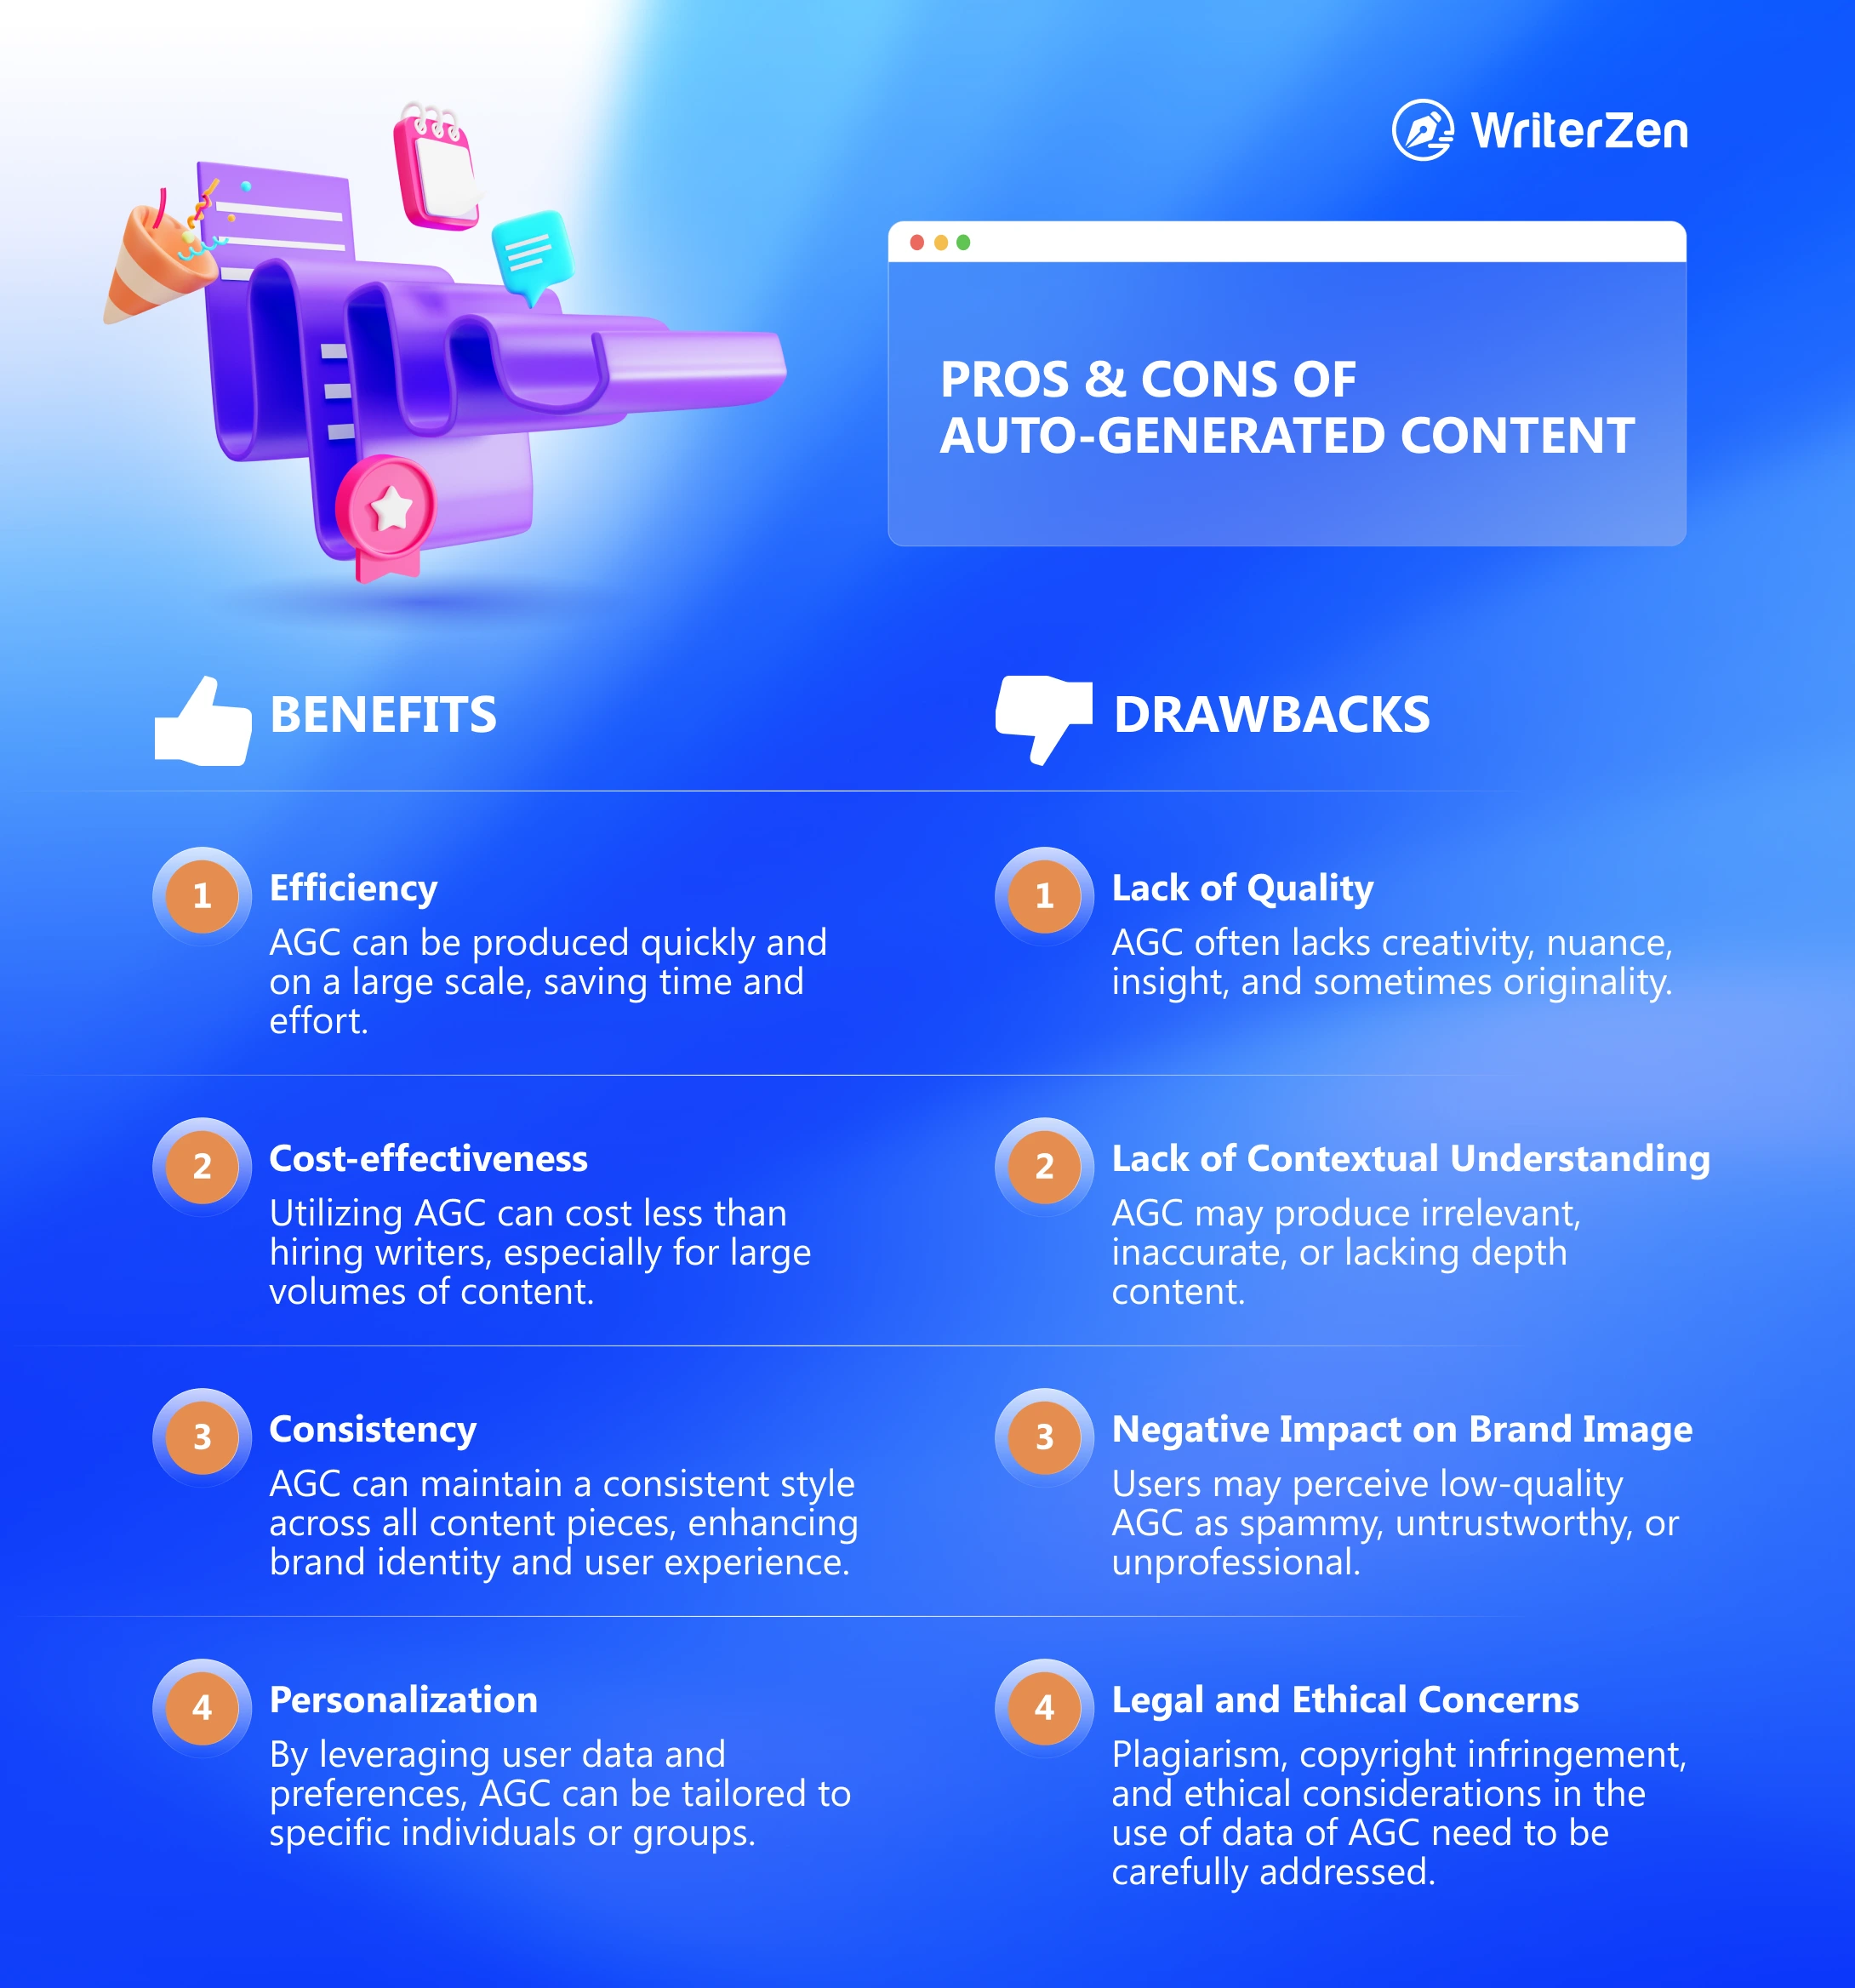 Pros and Cons of Auto-generated Content